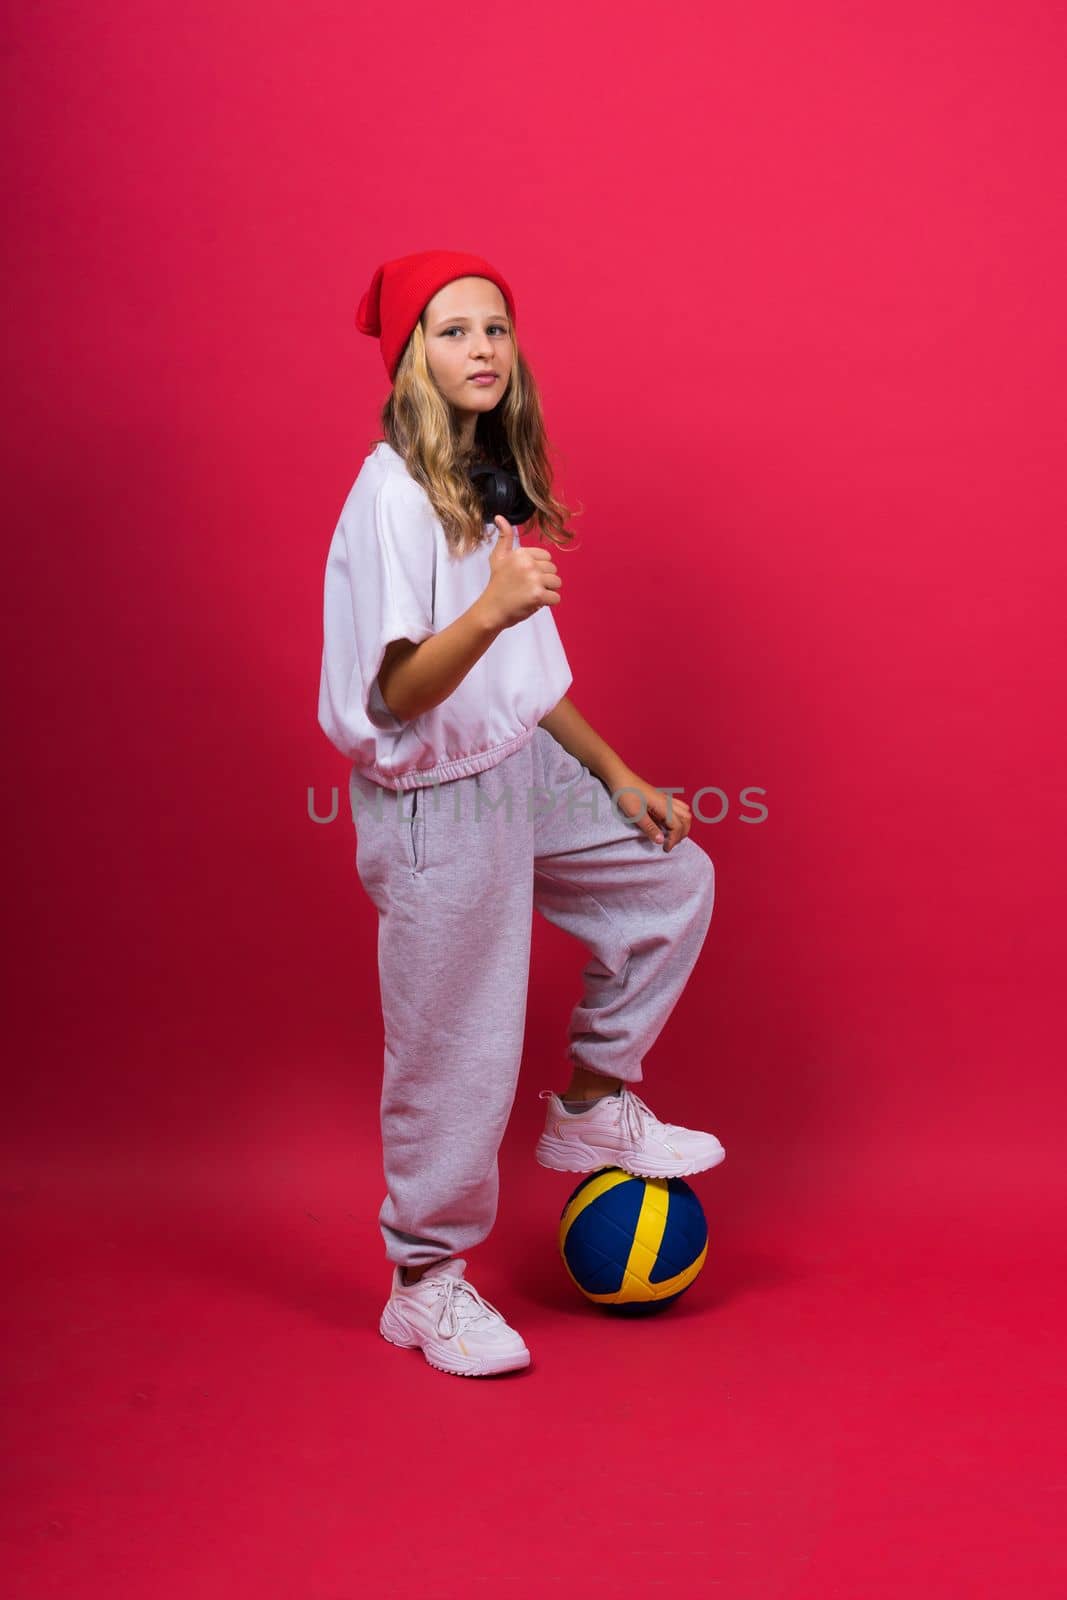 Portrait of a cute eight year old girl in volleyball outfit isolated on a red background by Zelenin